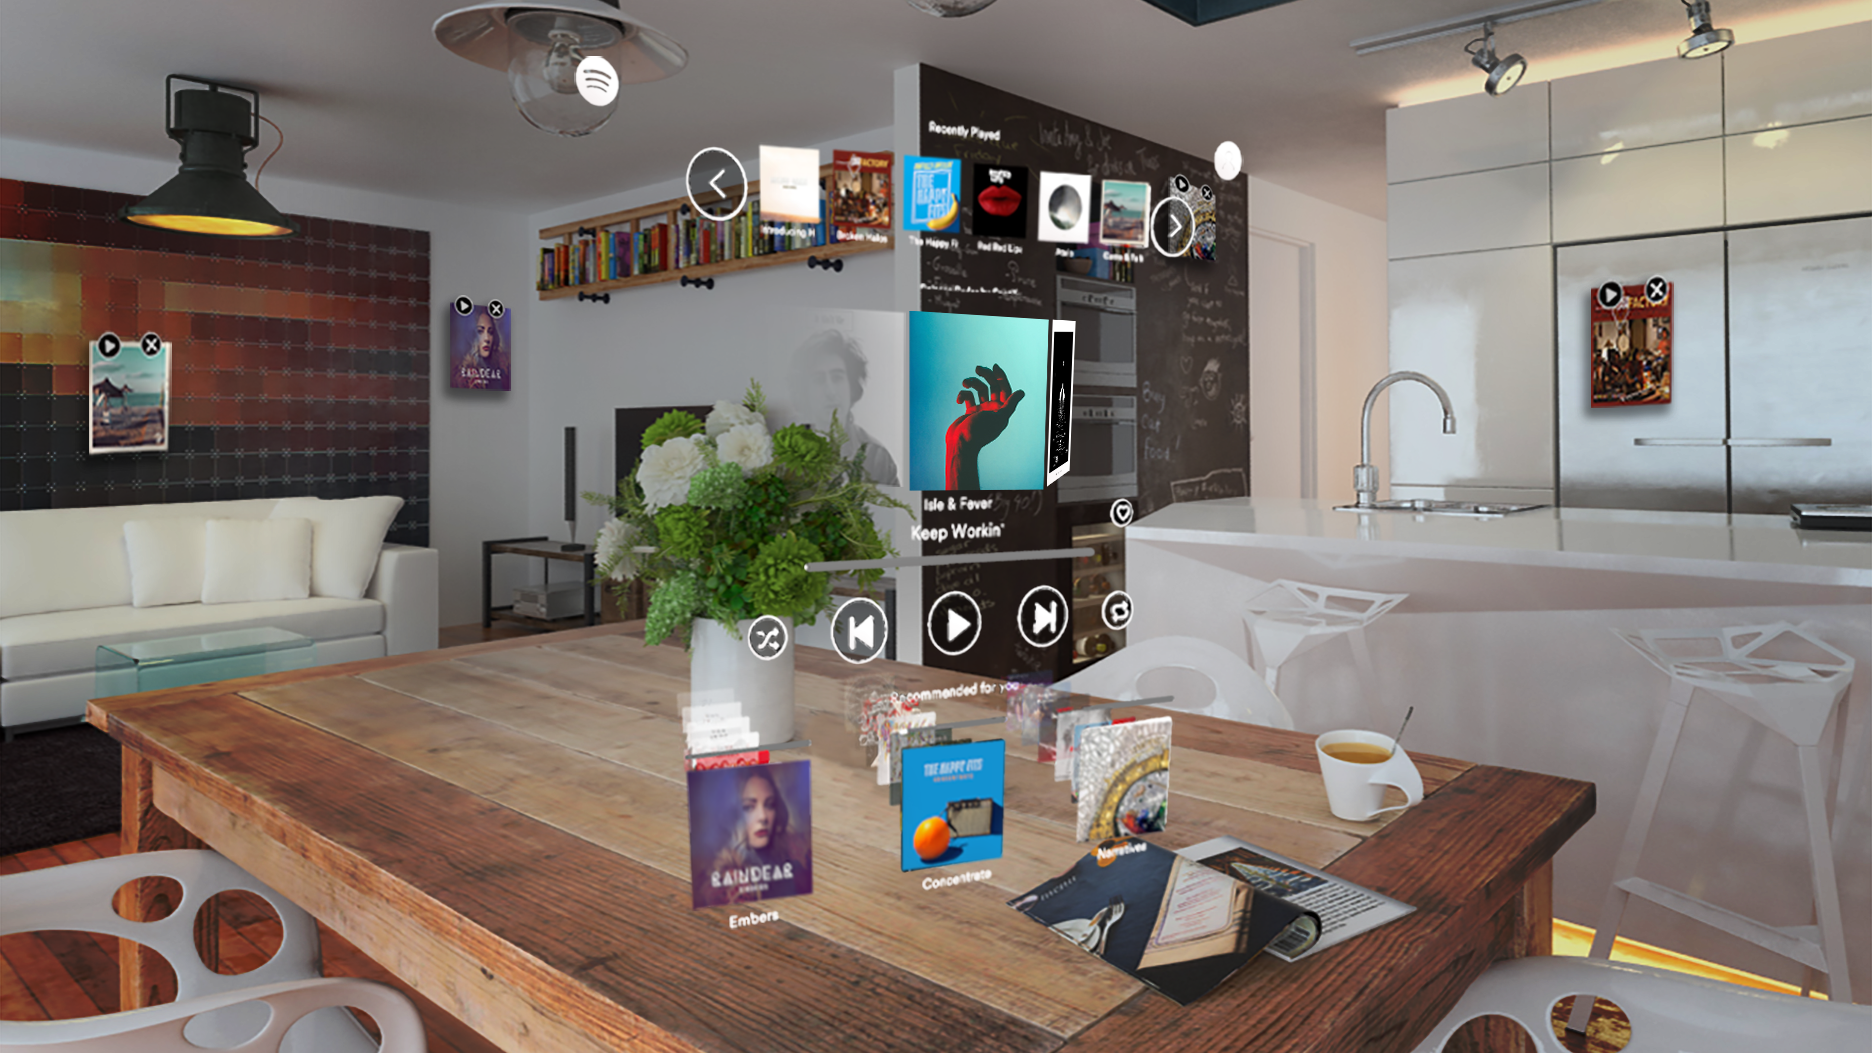 Floating AR Spotify app as seen through the Magic Leap business-oriented AR headset - AR is the future of smartphones, starting with Apple's AR glasses